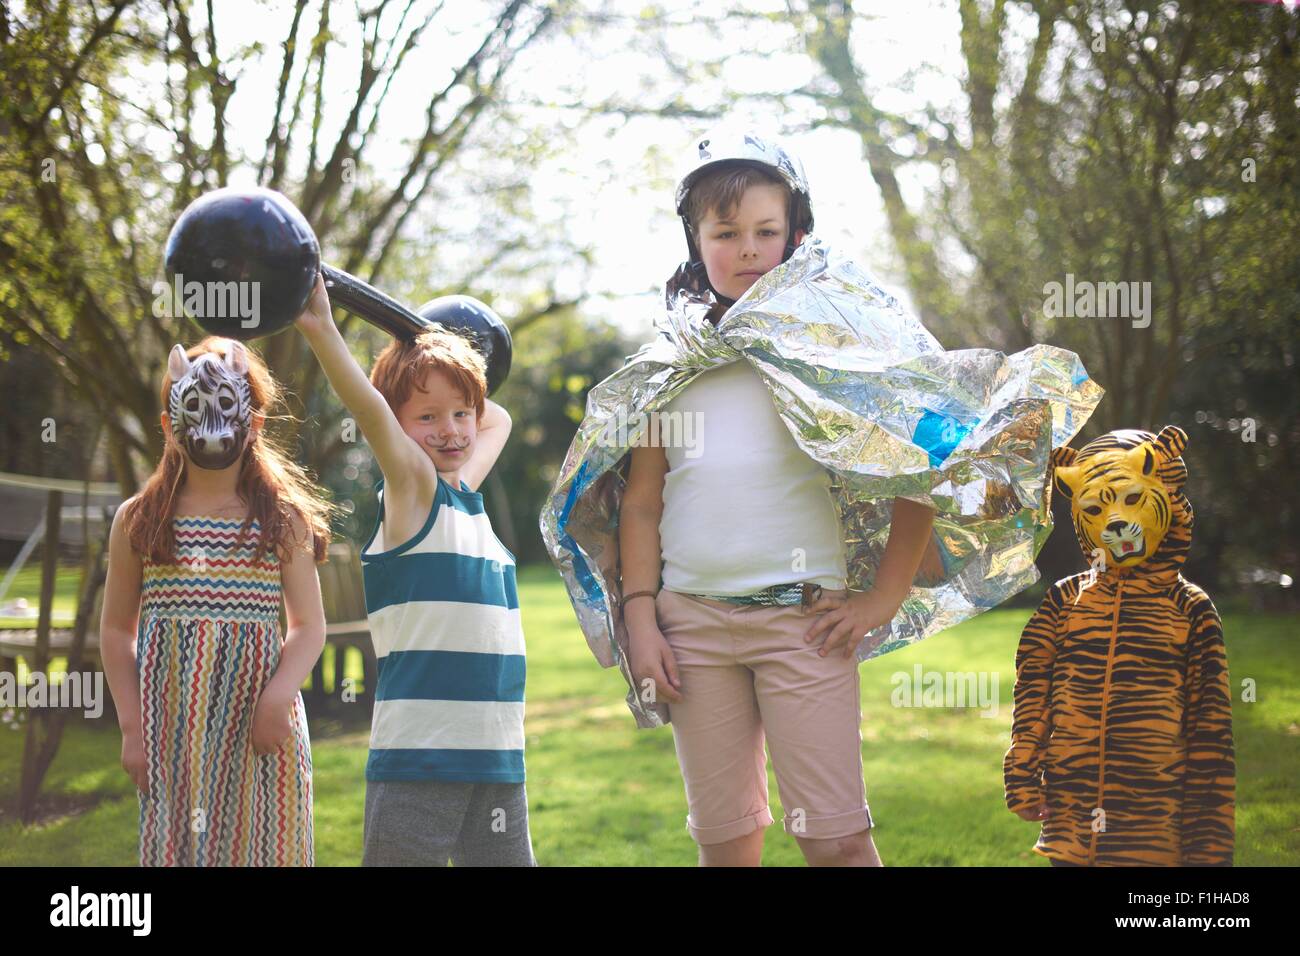 Portrait of young children wearing fancy dress, outdoors Stock Photo